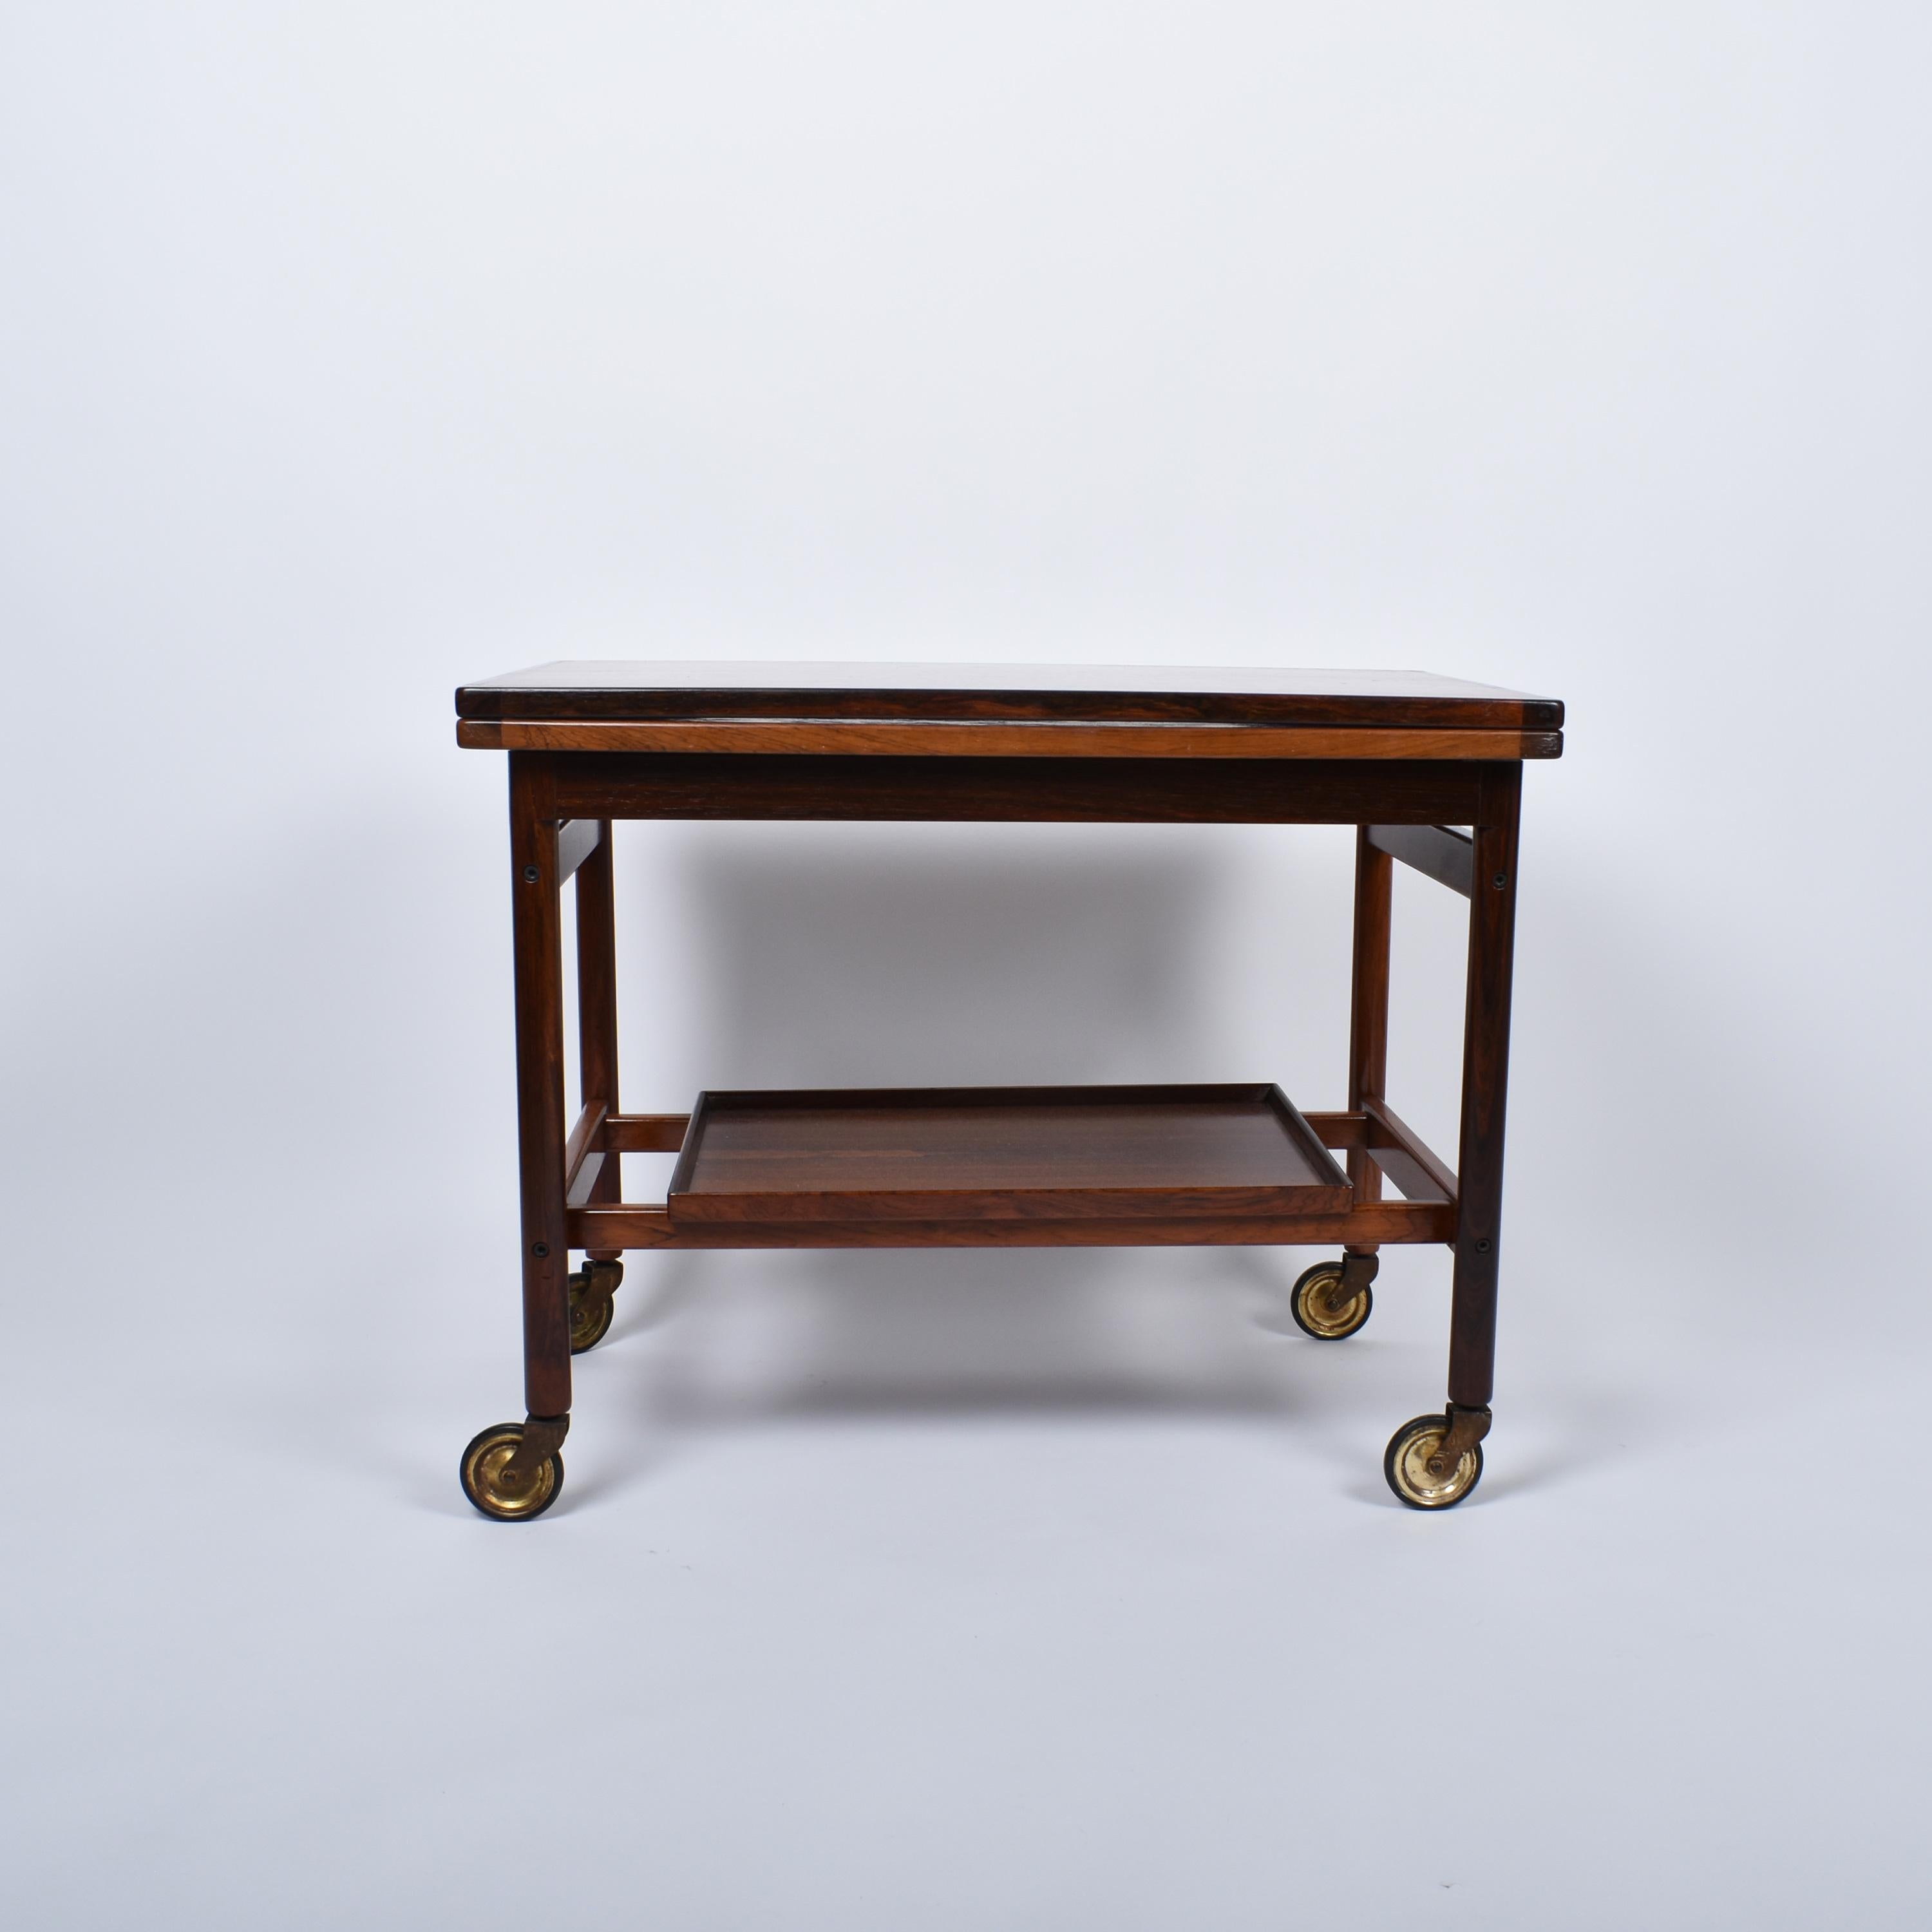 Santos bar cart with removeable tray.
The top slides to unfold and reveal a stain proofed black melamine.
Designed by Kurt Østervig in the sixties. 
One can still admire the master's attention for details, like nice joinery or assemblages, and this